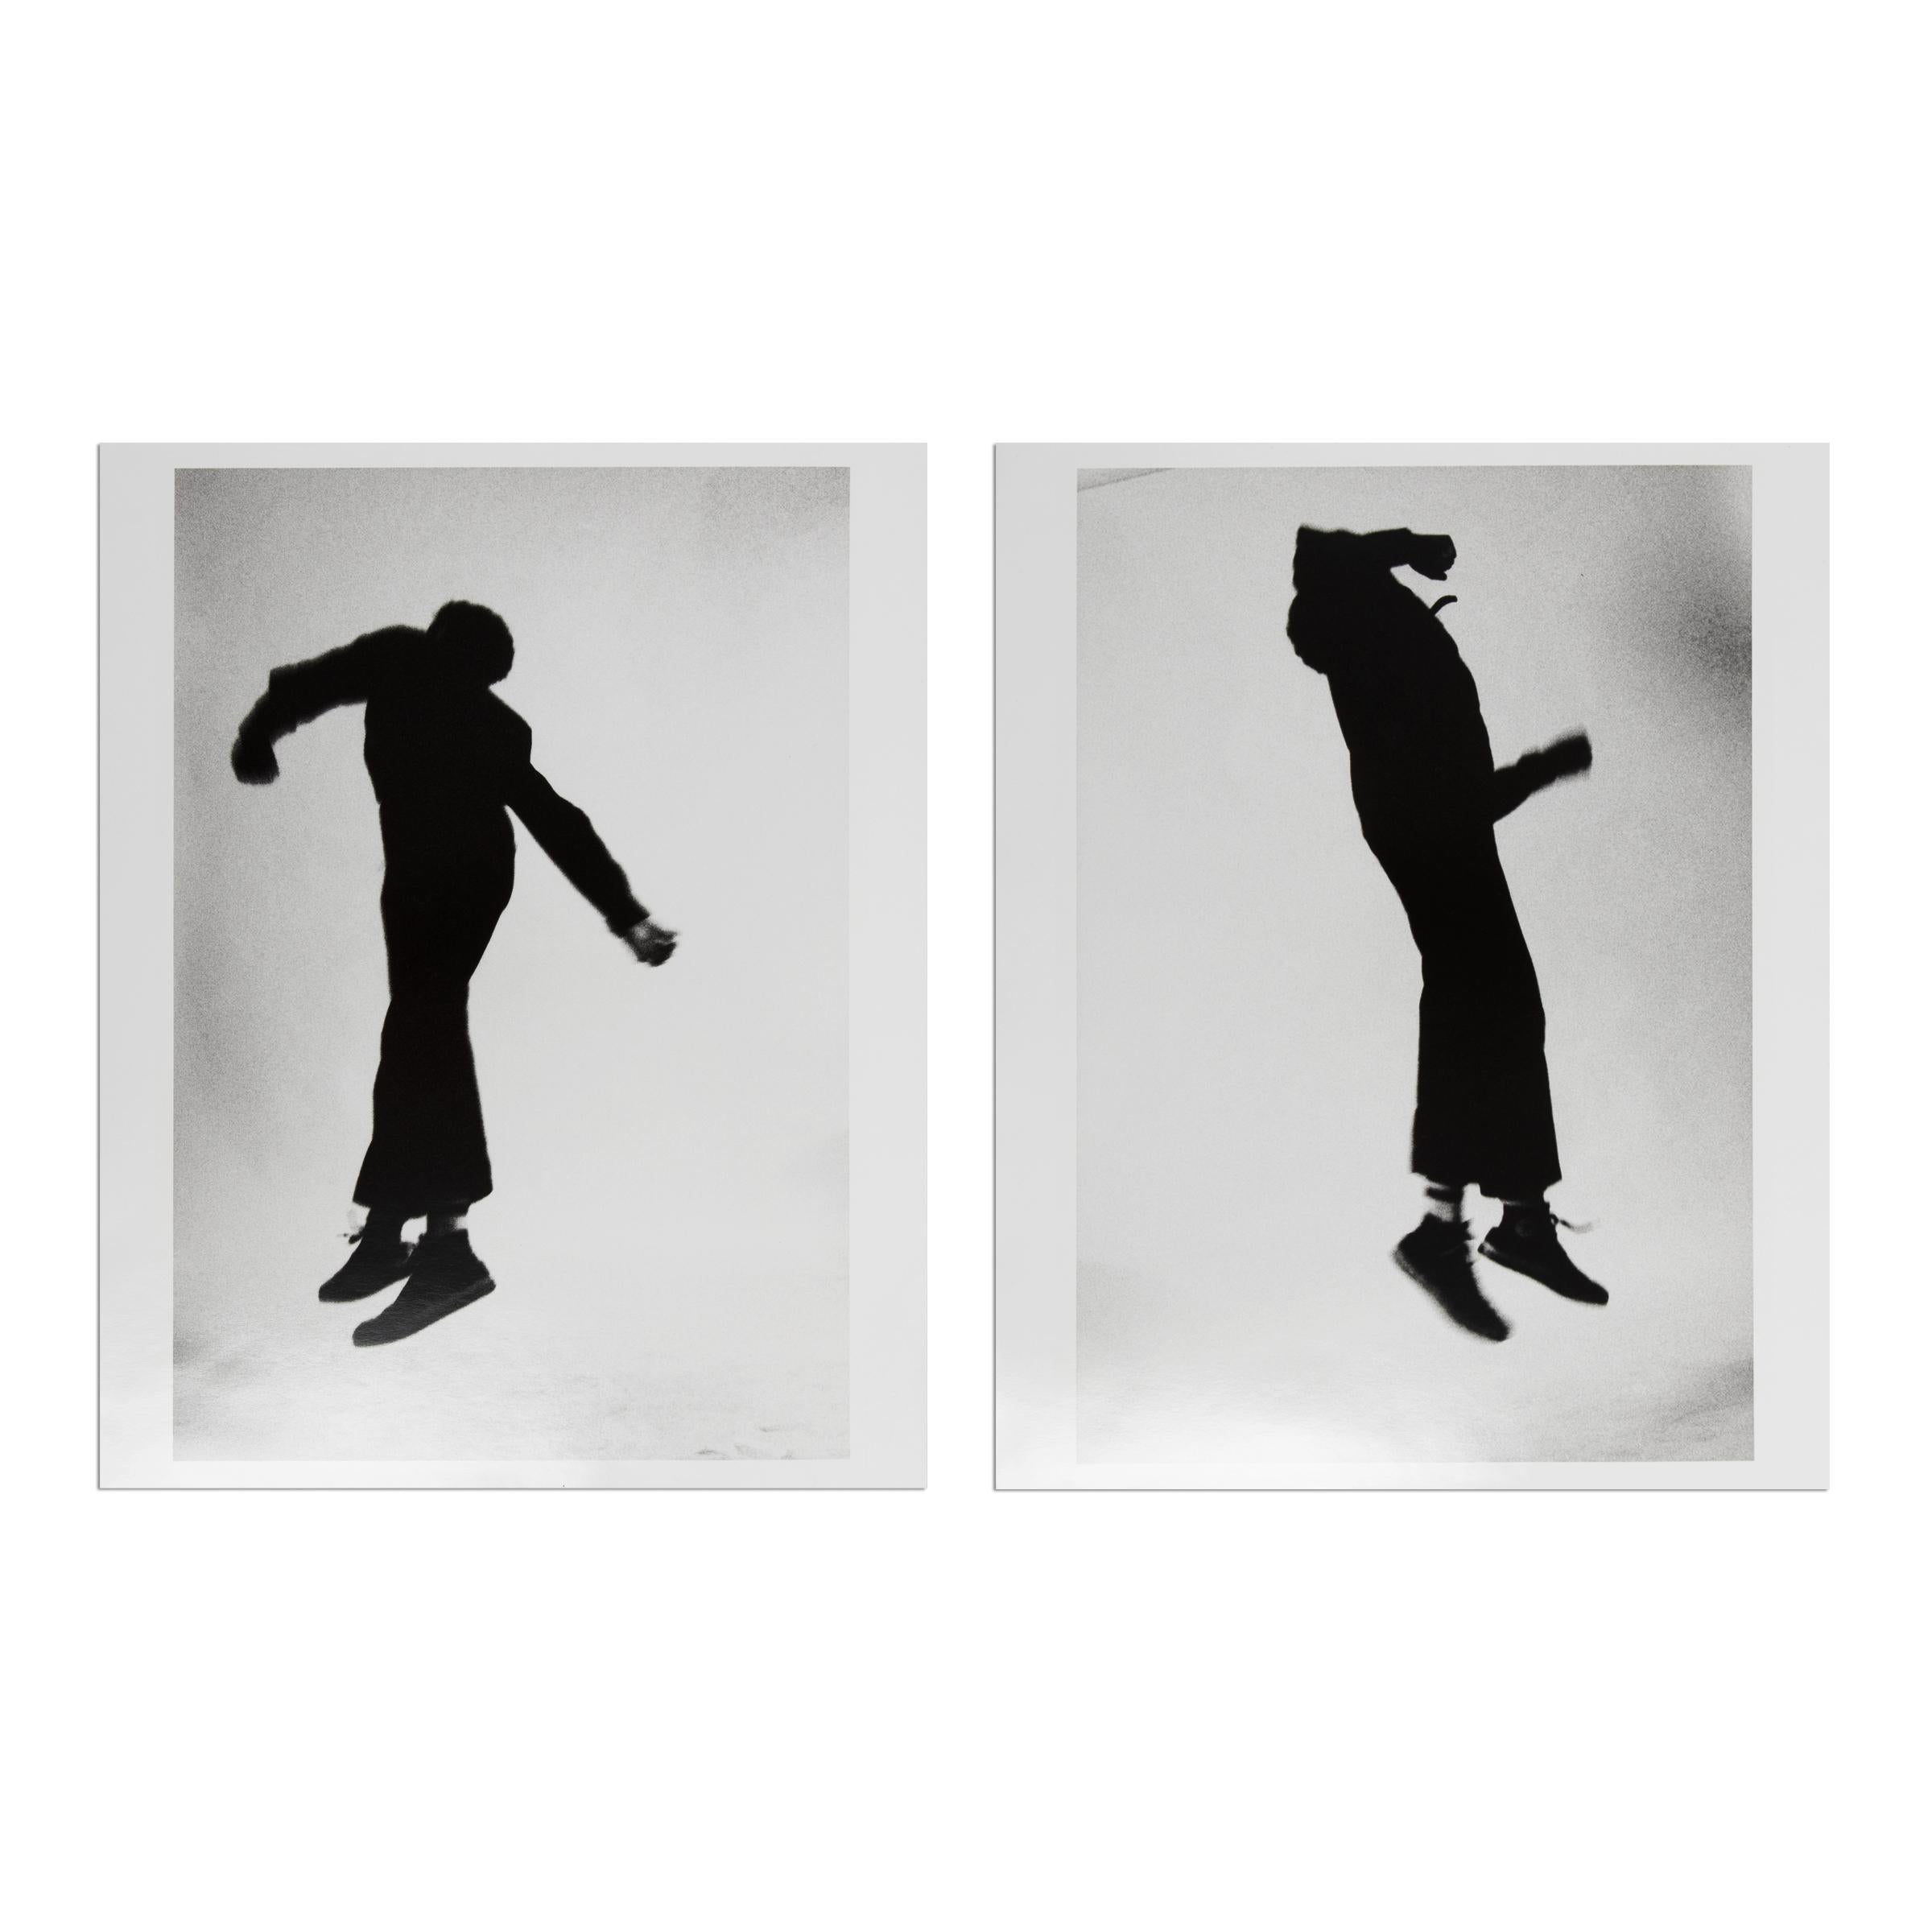 Robert Longo (American, born 1953)
Untitled (Men in the Cities), 1976/2009
Medium: Set of two gelatin silver prints
Dimensions: each 50.8 x 40.64 cm (20 x 16 in); overall 50.8 x 81.28 cm (20 x 32 in)
Edition of 10: Hand-signed and numbered